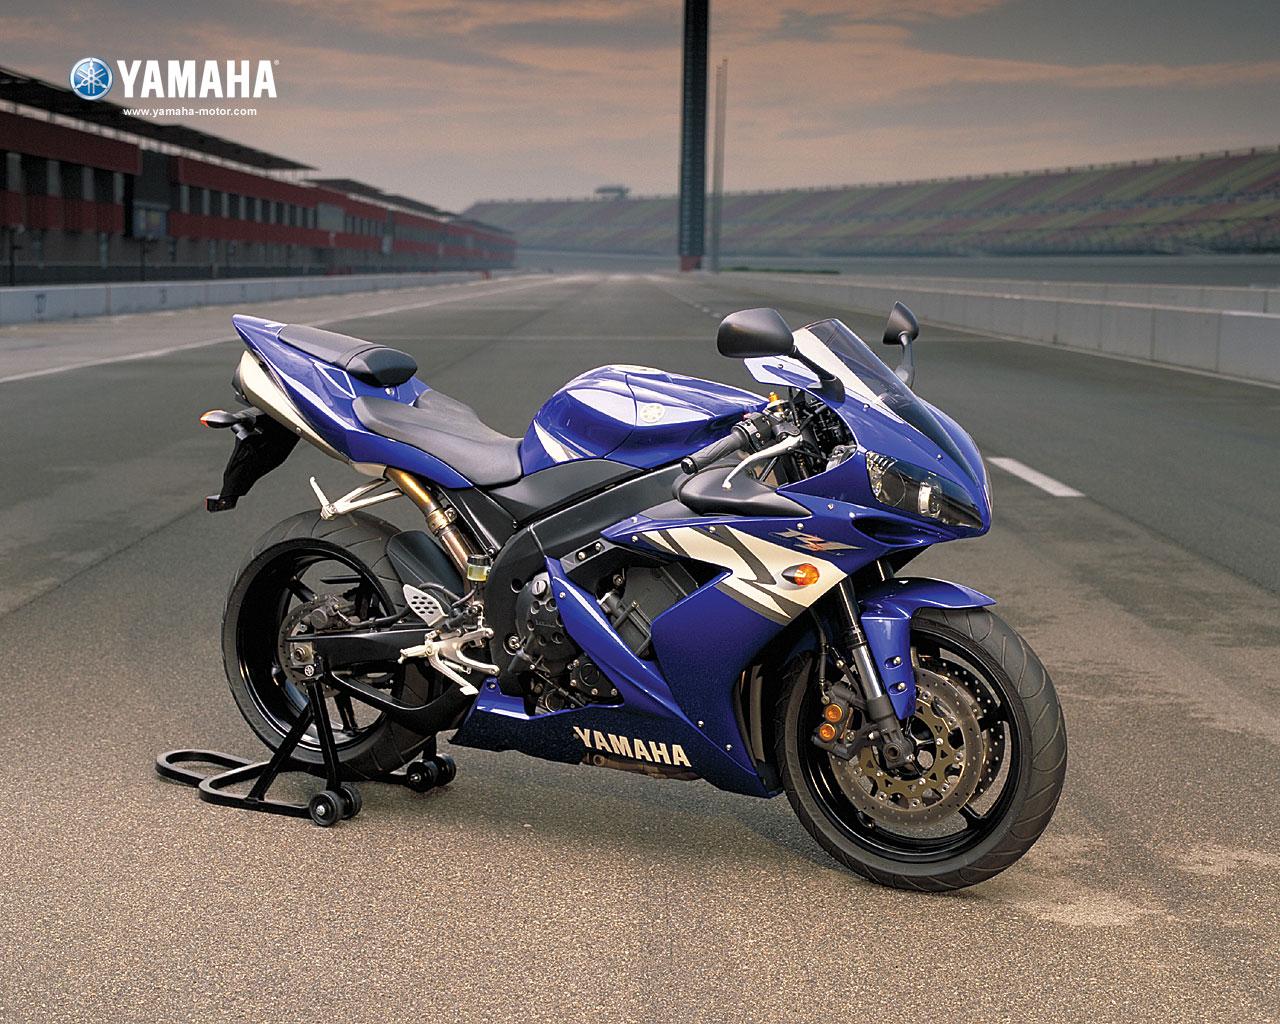 Yamaha Yzf R1 Picture Photo Gallery Carsbase